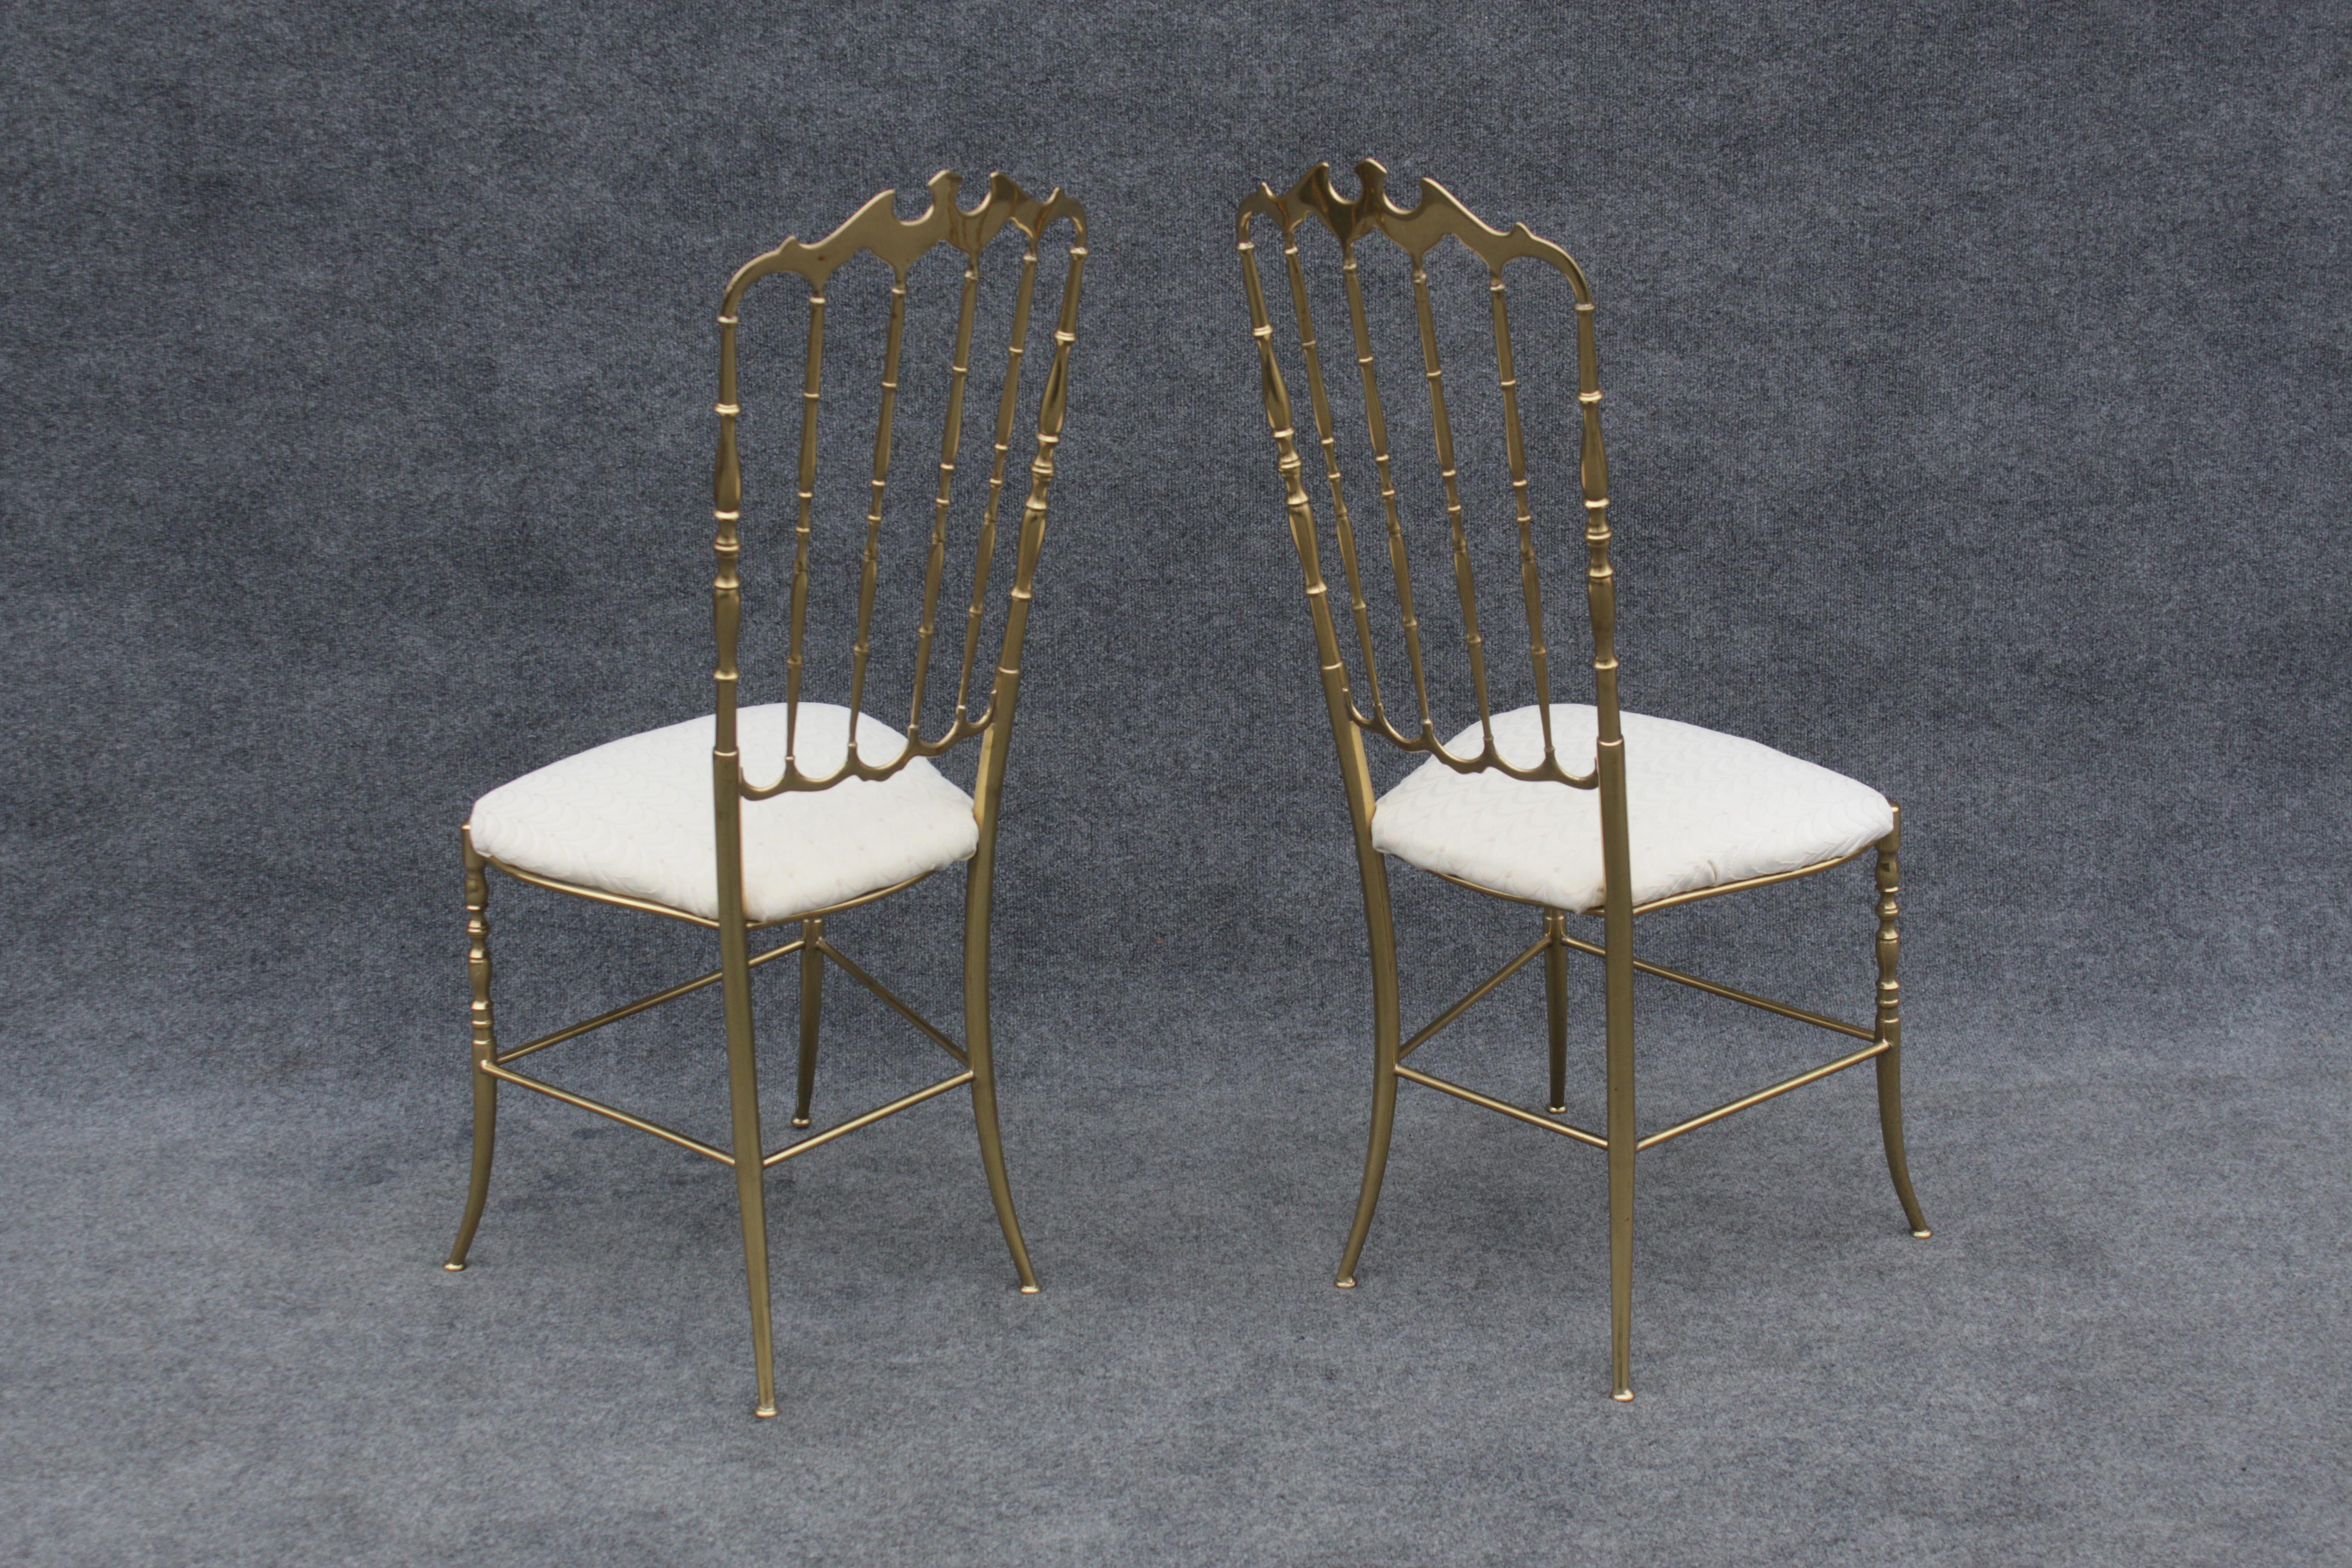 Pair of Solid Brass & White Upholstered Dining or Side Chairs by Chiavari Italy For Sale 4